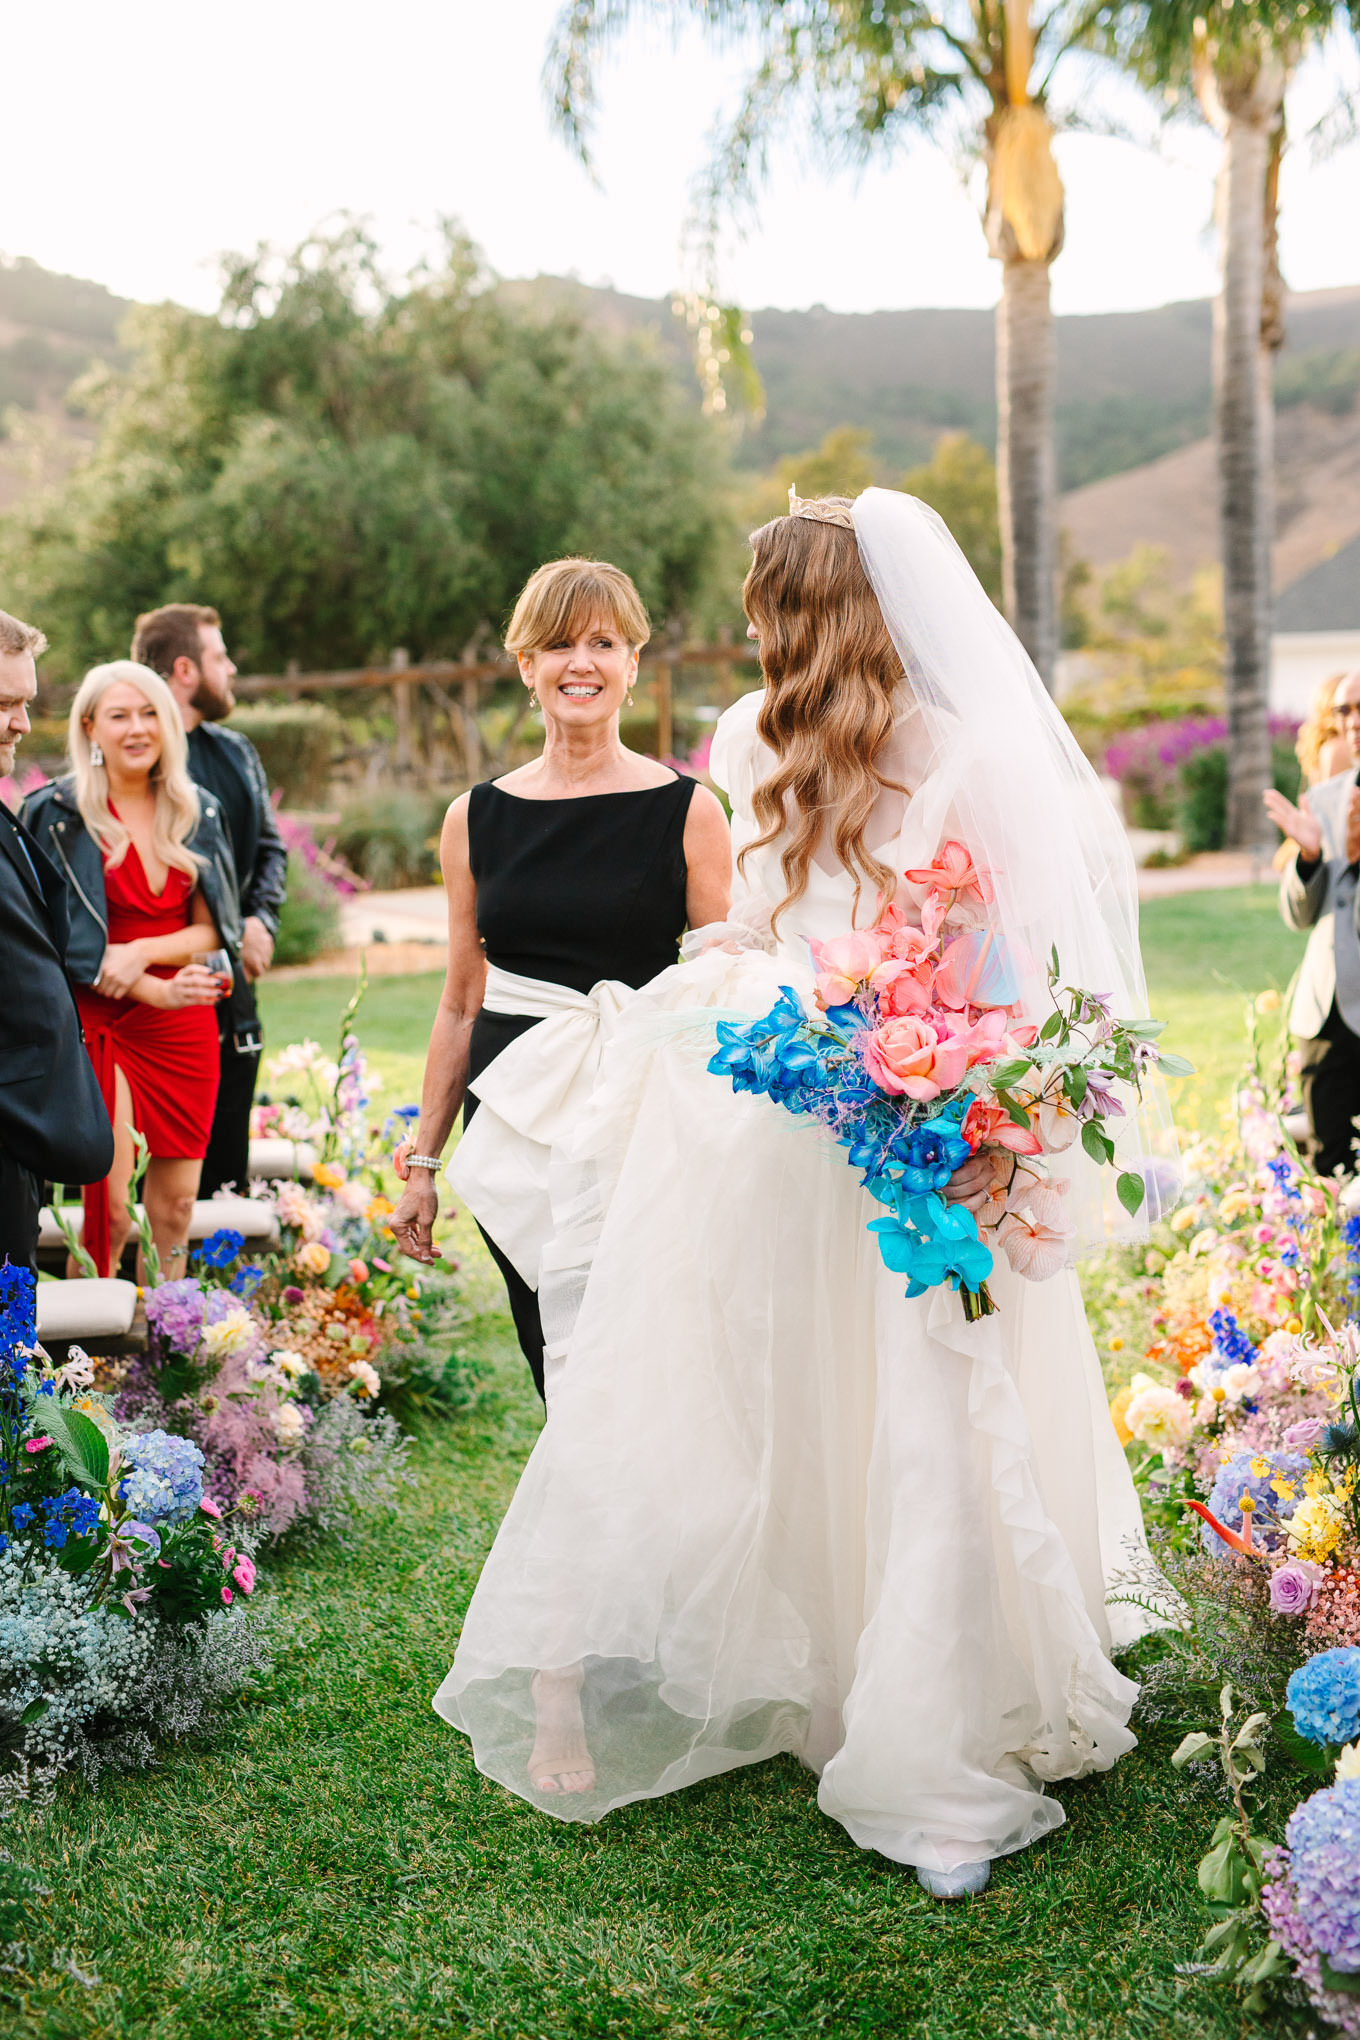 Bride Allison Harvard walking down the aisle at wedding ceremony | Colorful and quirky wedding at Higuera Ranch in San Luis Obispo | #sanluisobispowedding #californiawedding #higueraranch #madonnainn   
Source: Mary Costa Photography | Los Angeles